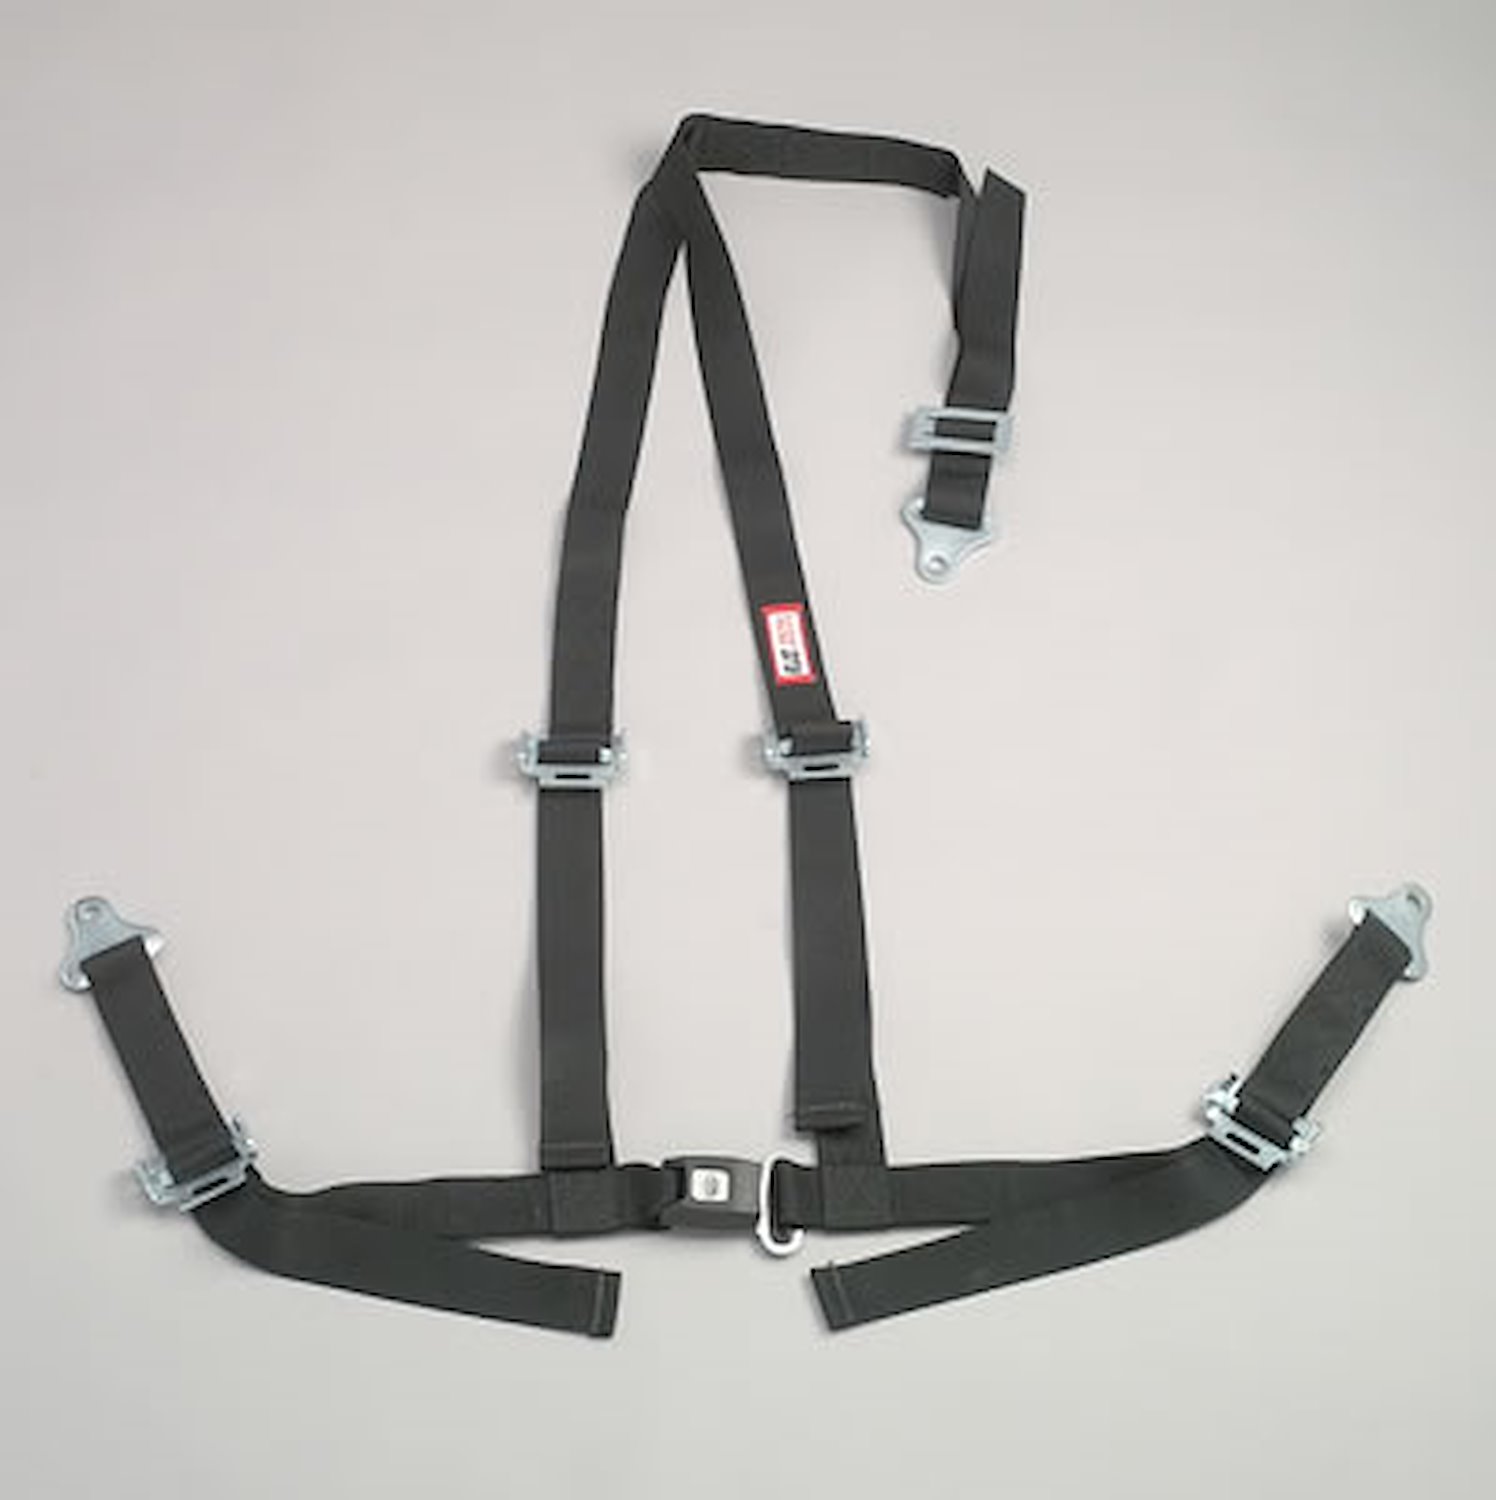 NON-SFI B&T HARNESS 2 PULL UP Lap Belt SNAP 2 S.H. INDIVIDUAL FLOOR Mount WRAP/BOLT GRAY